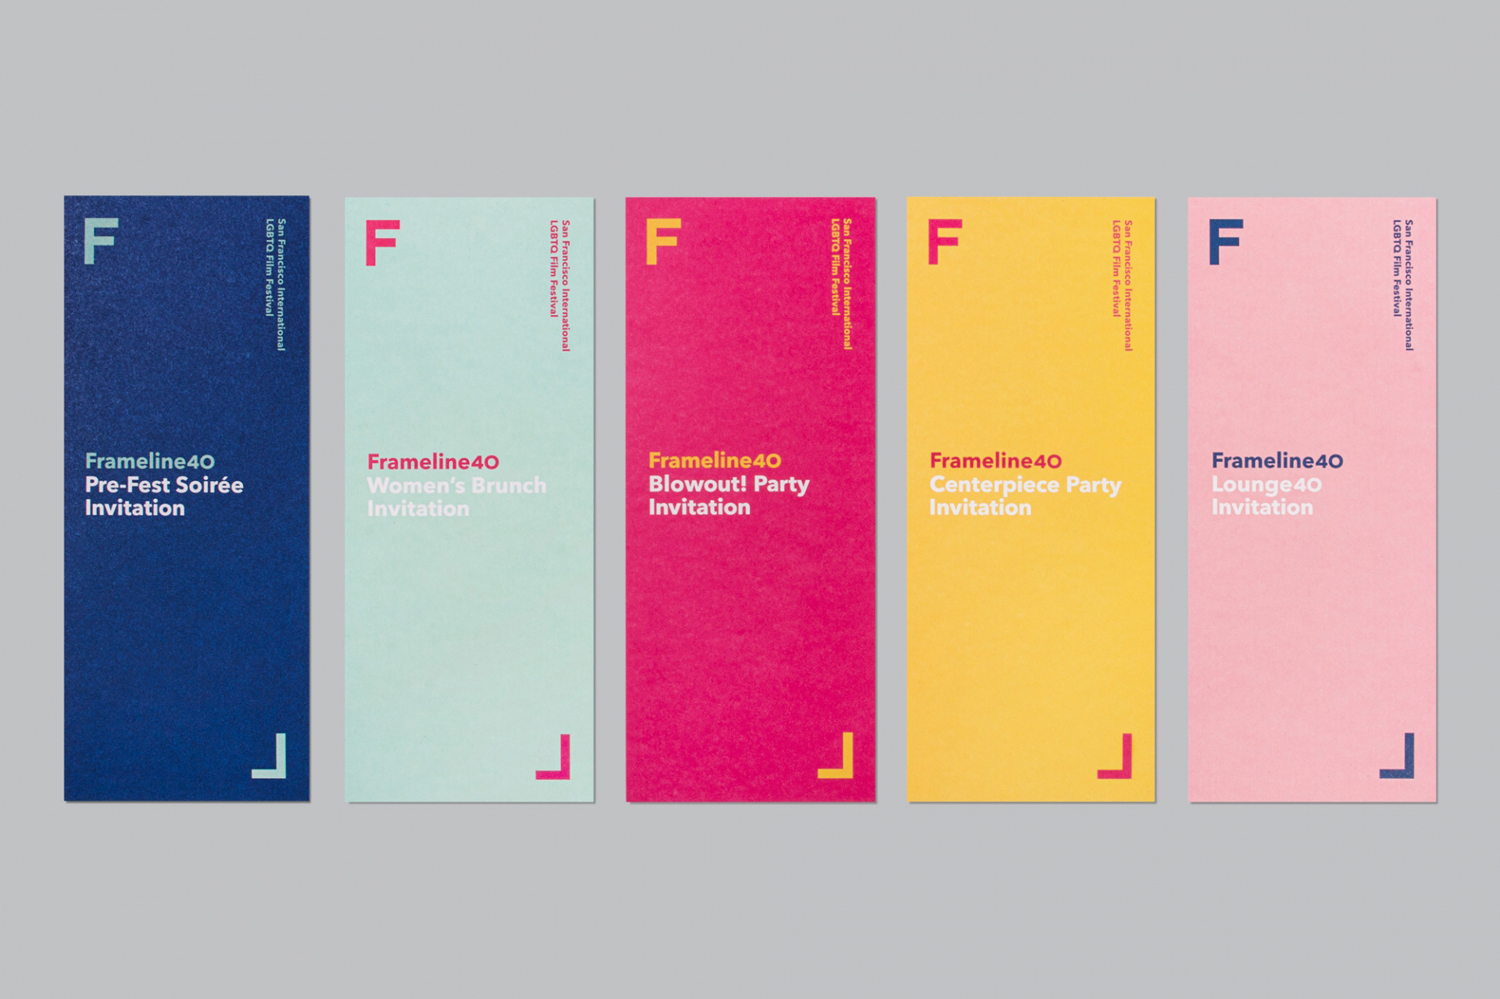 Brand identity and invitations by Mucho for San Francisco based LGBT film festival and nonprofit arts organisation Frameline.